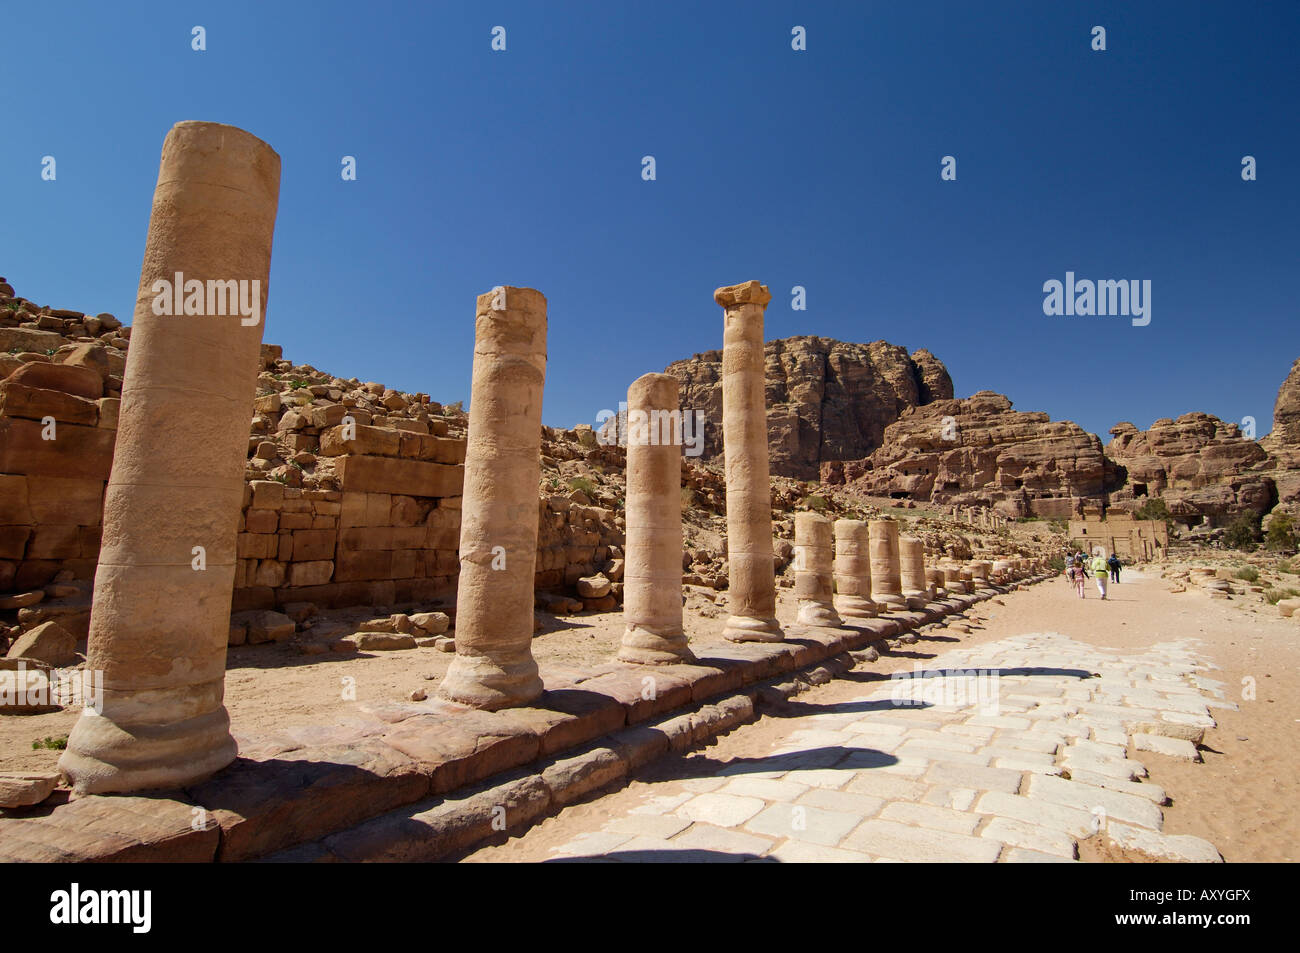 Colonnaded street, Petra, UNESCO World Heritage Site, Jordan, Middle East Stock Photo